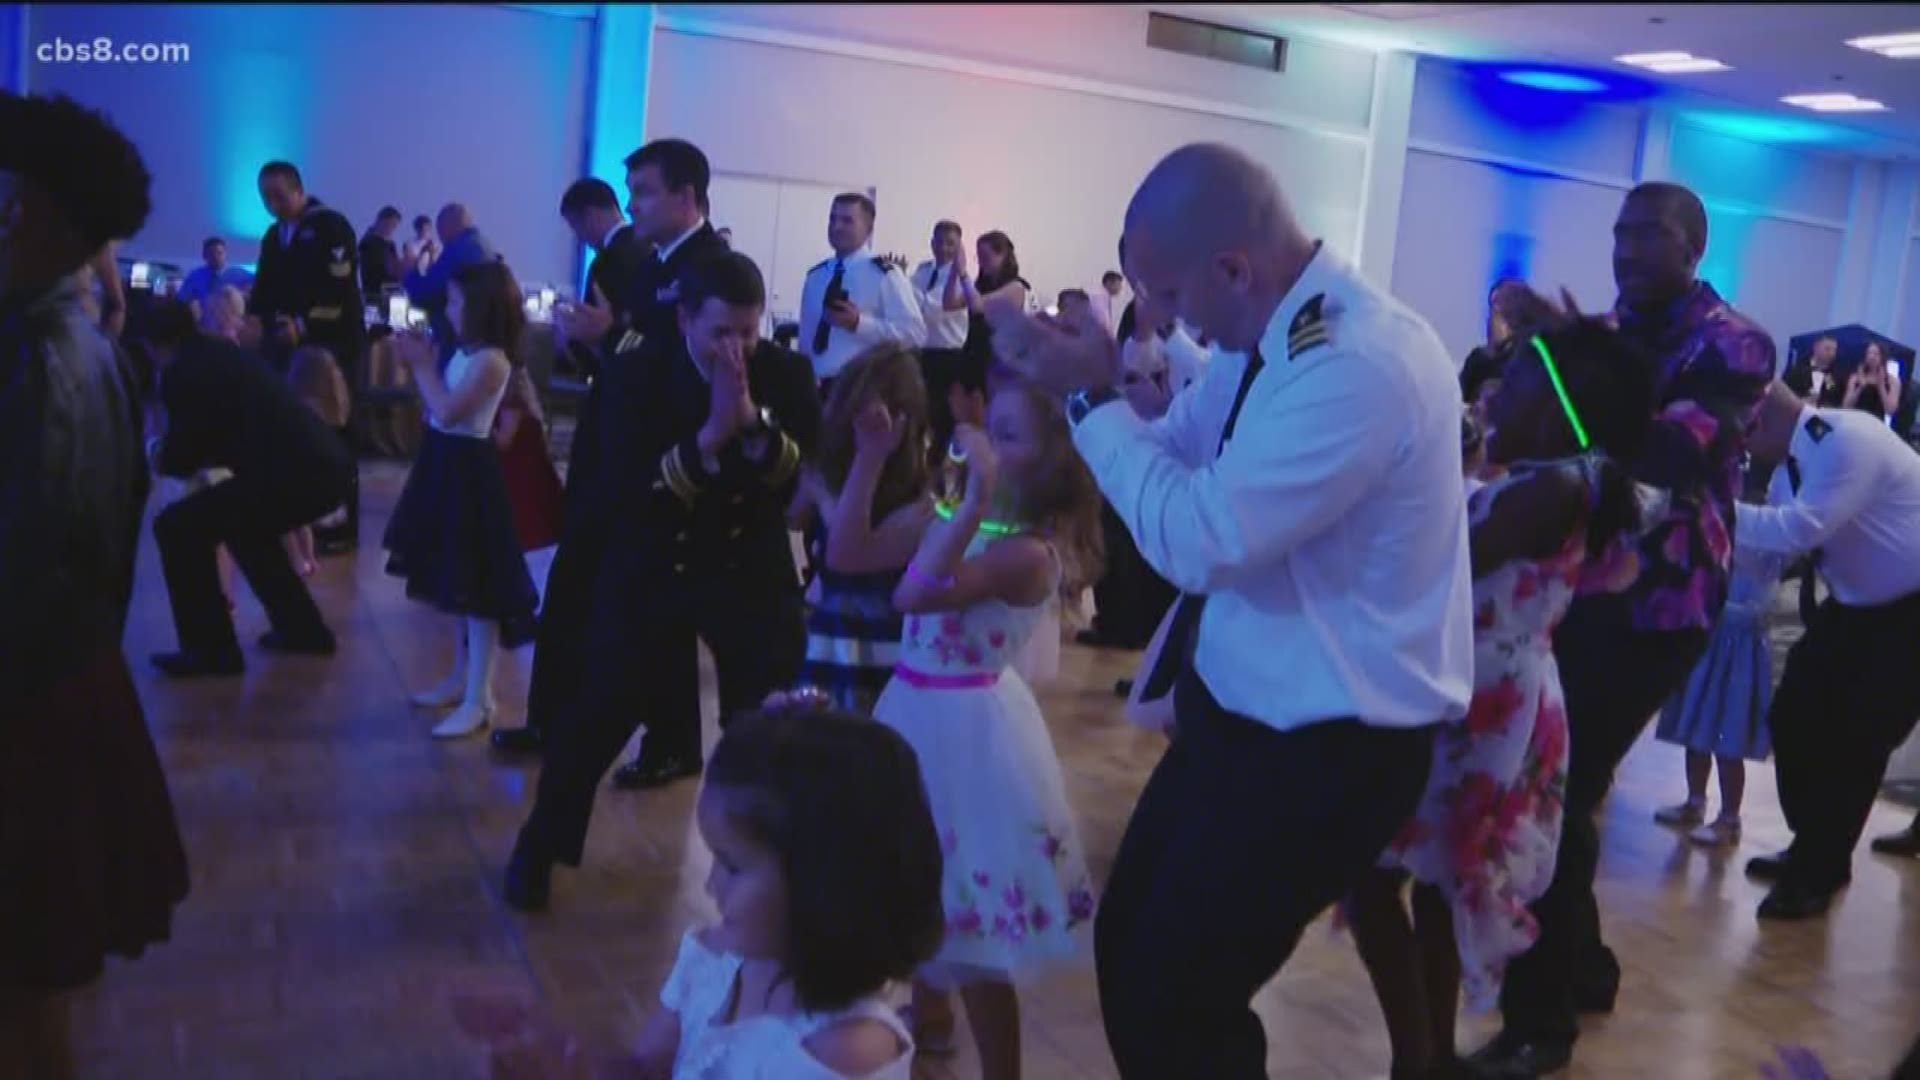 Military dad's taking their daughter for a spin on the dance floor.